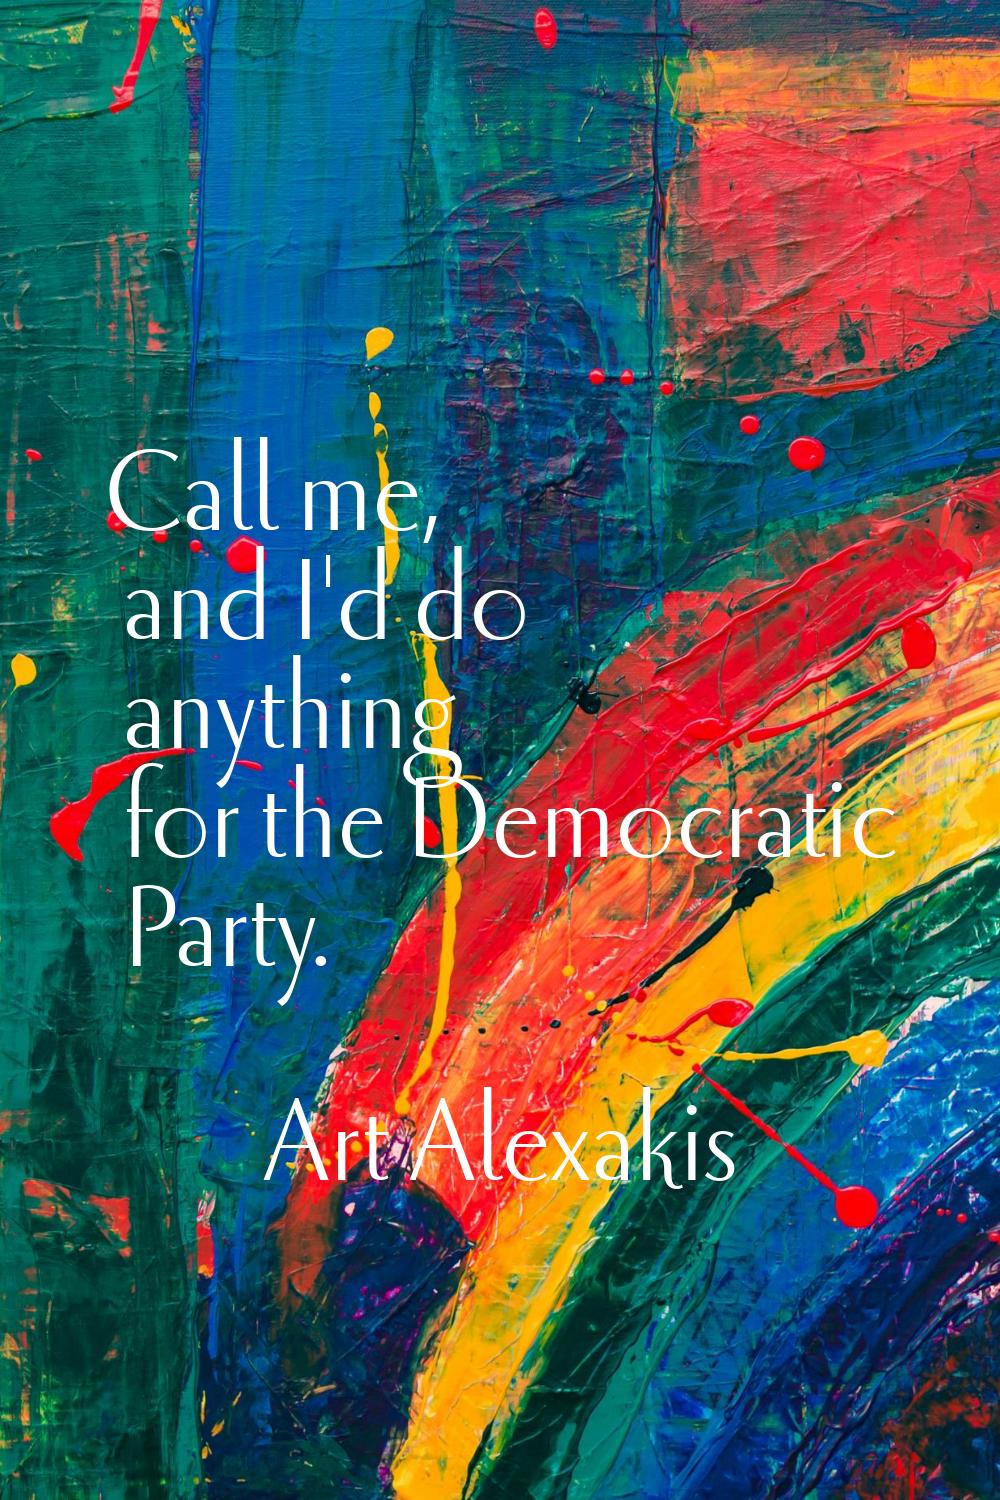 Call me, and I'd do anything for the Democratic Party.